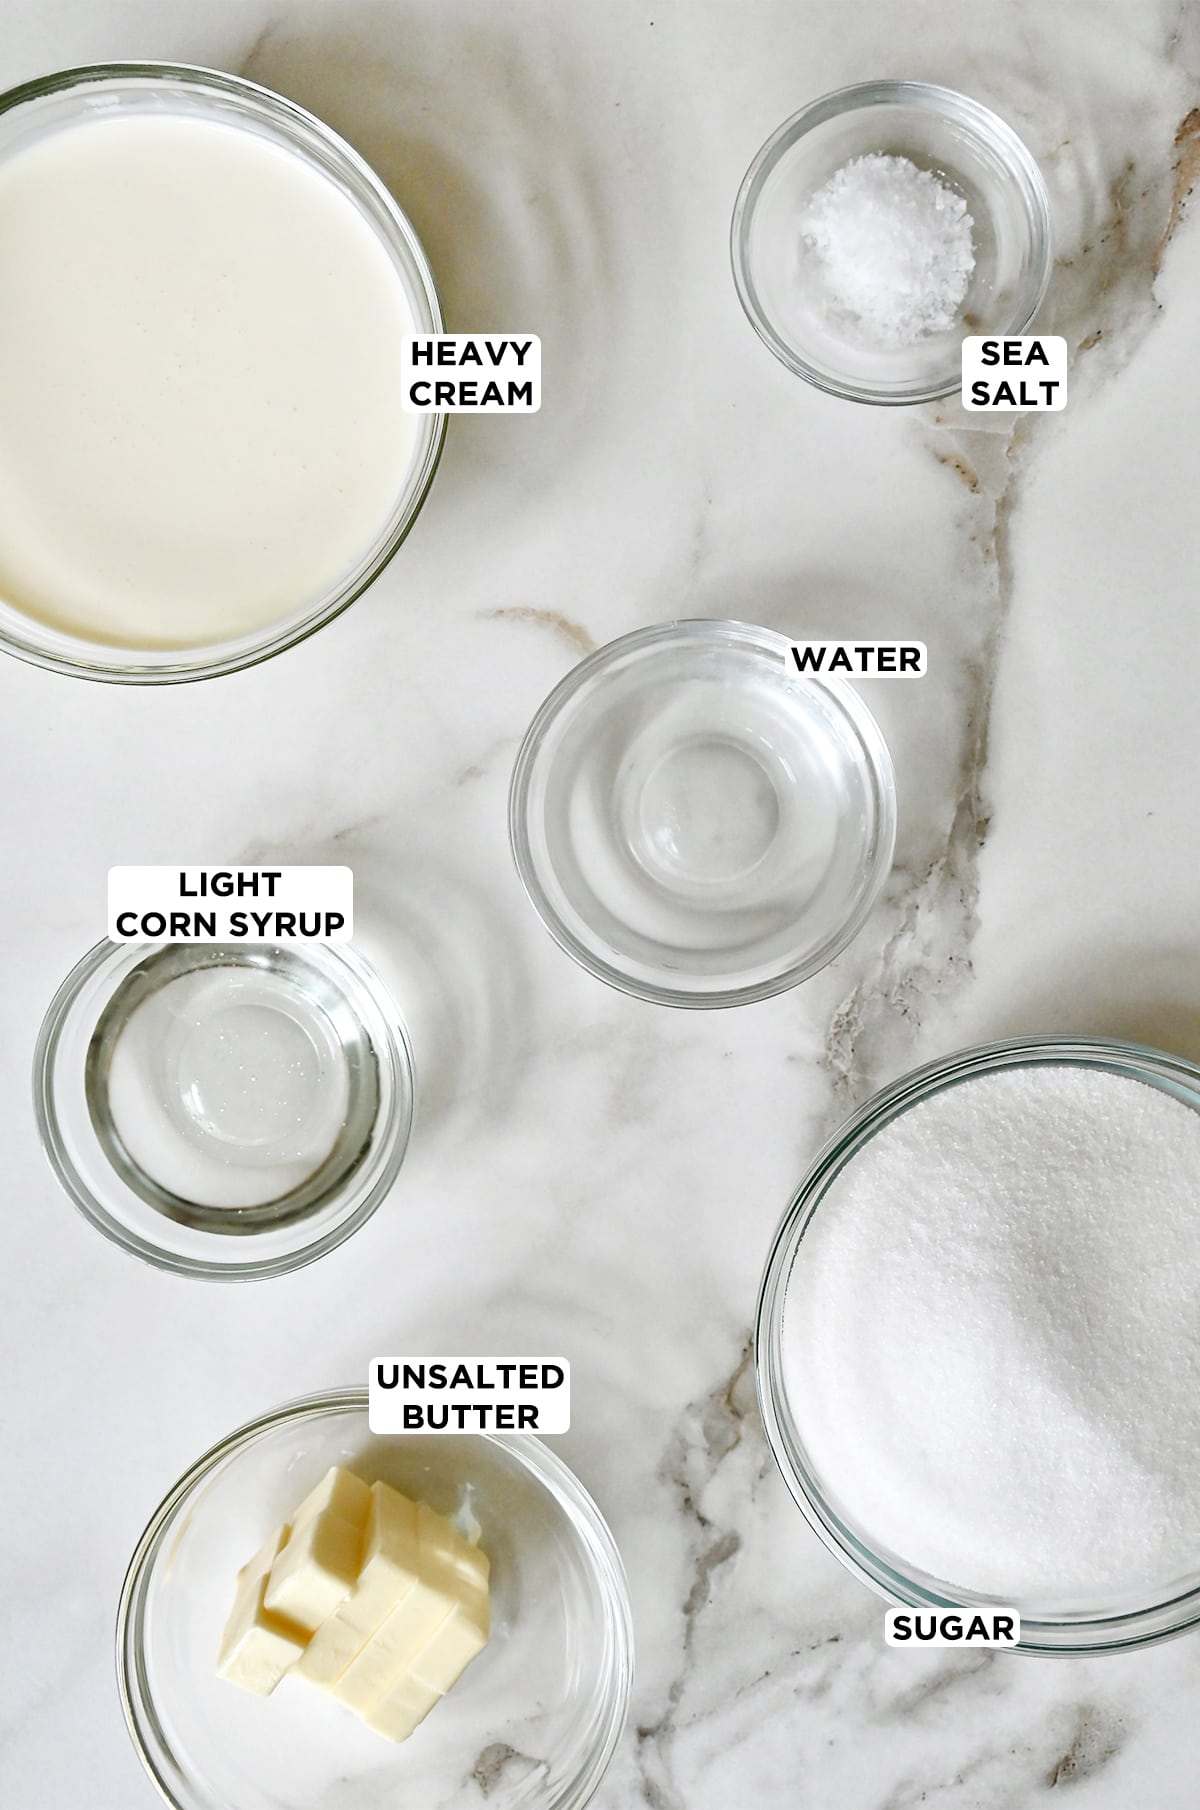 Various sizes of glass bowls containing heavy cream, sea salt, water, sugar, unsalted butter and light corn syrup.